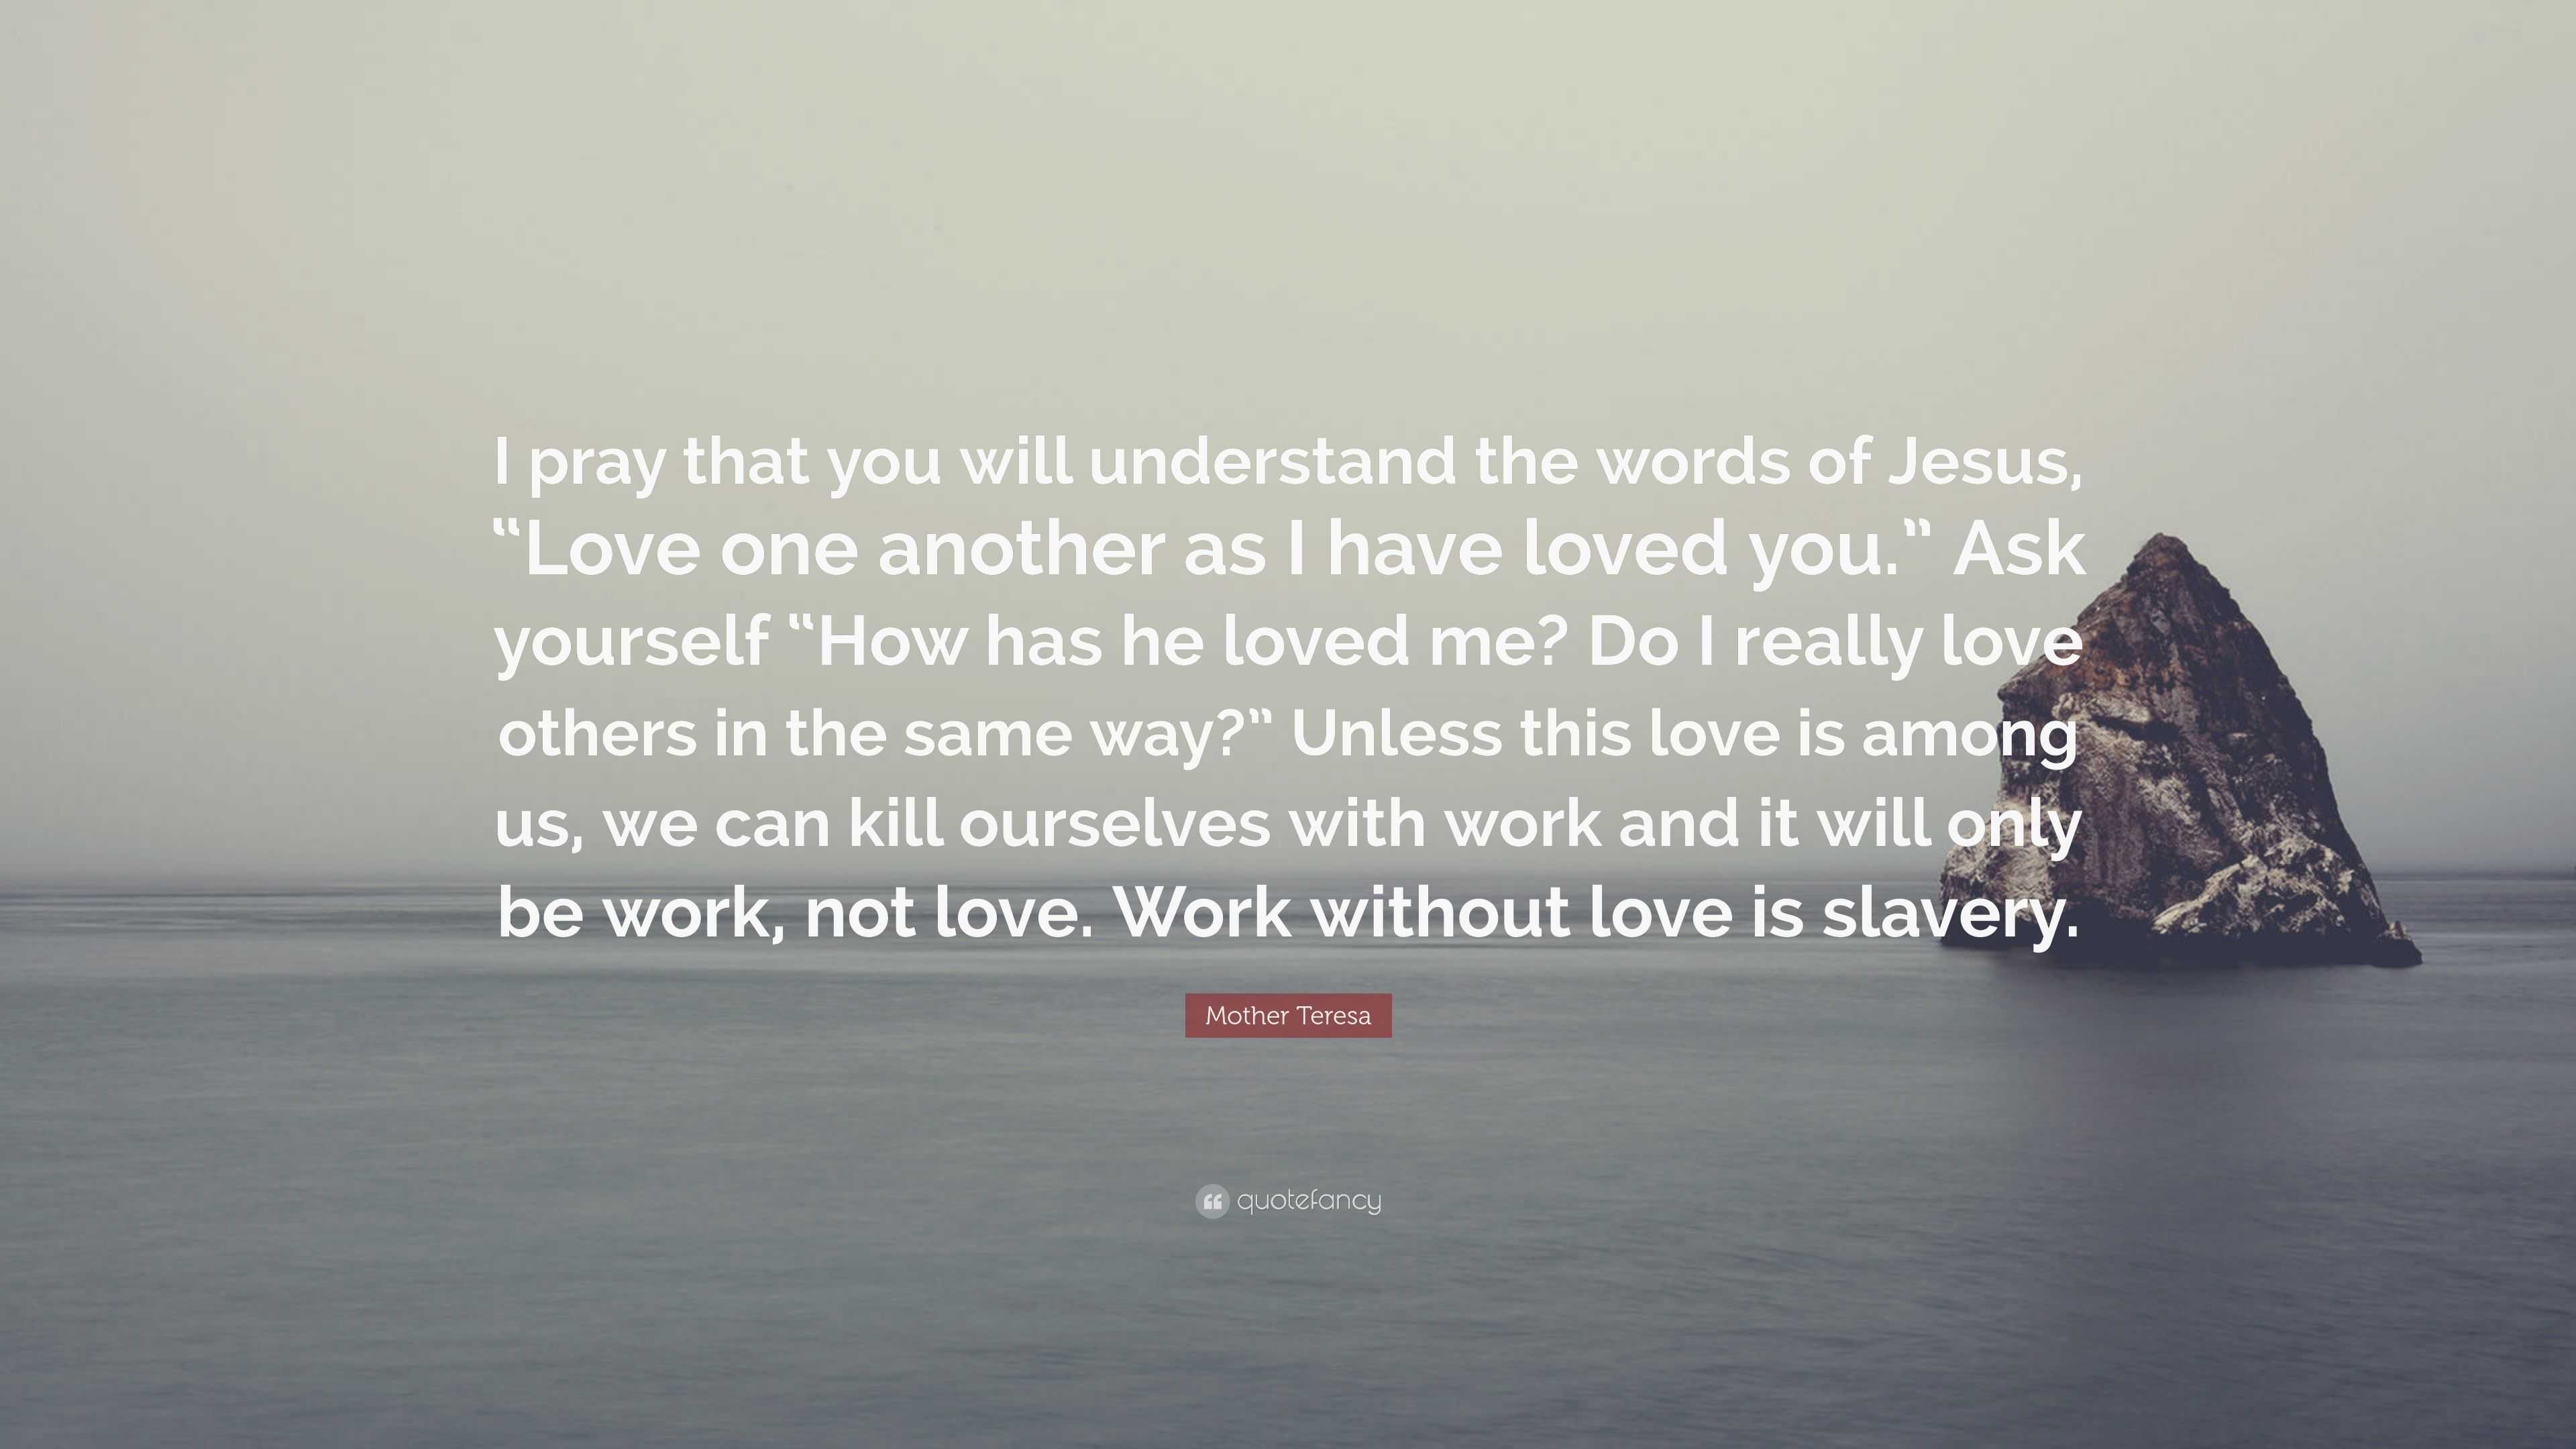 Mother Teresa Quote “I pray that you will understand the words of Jesus